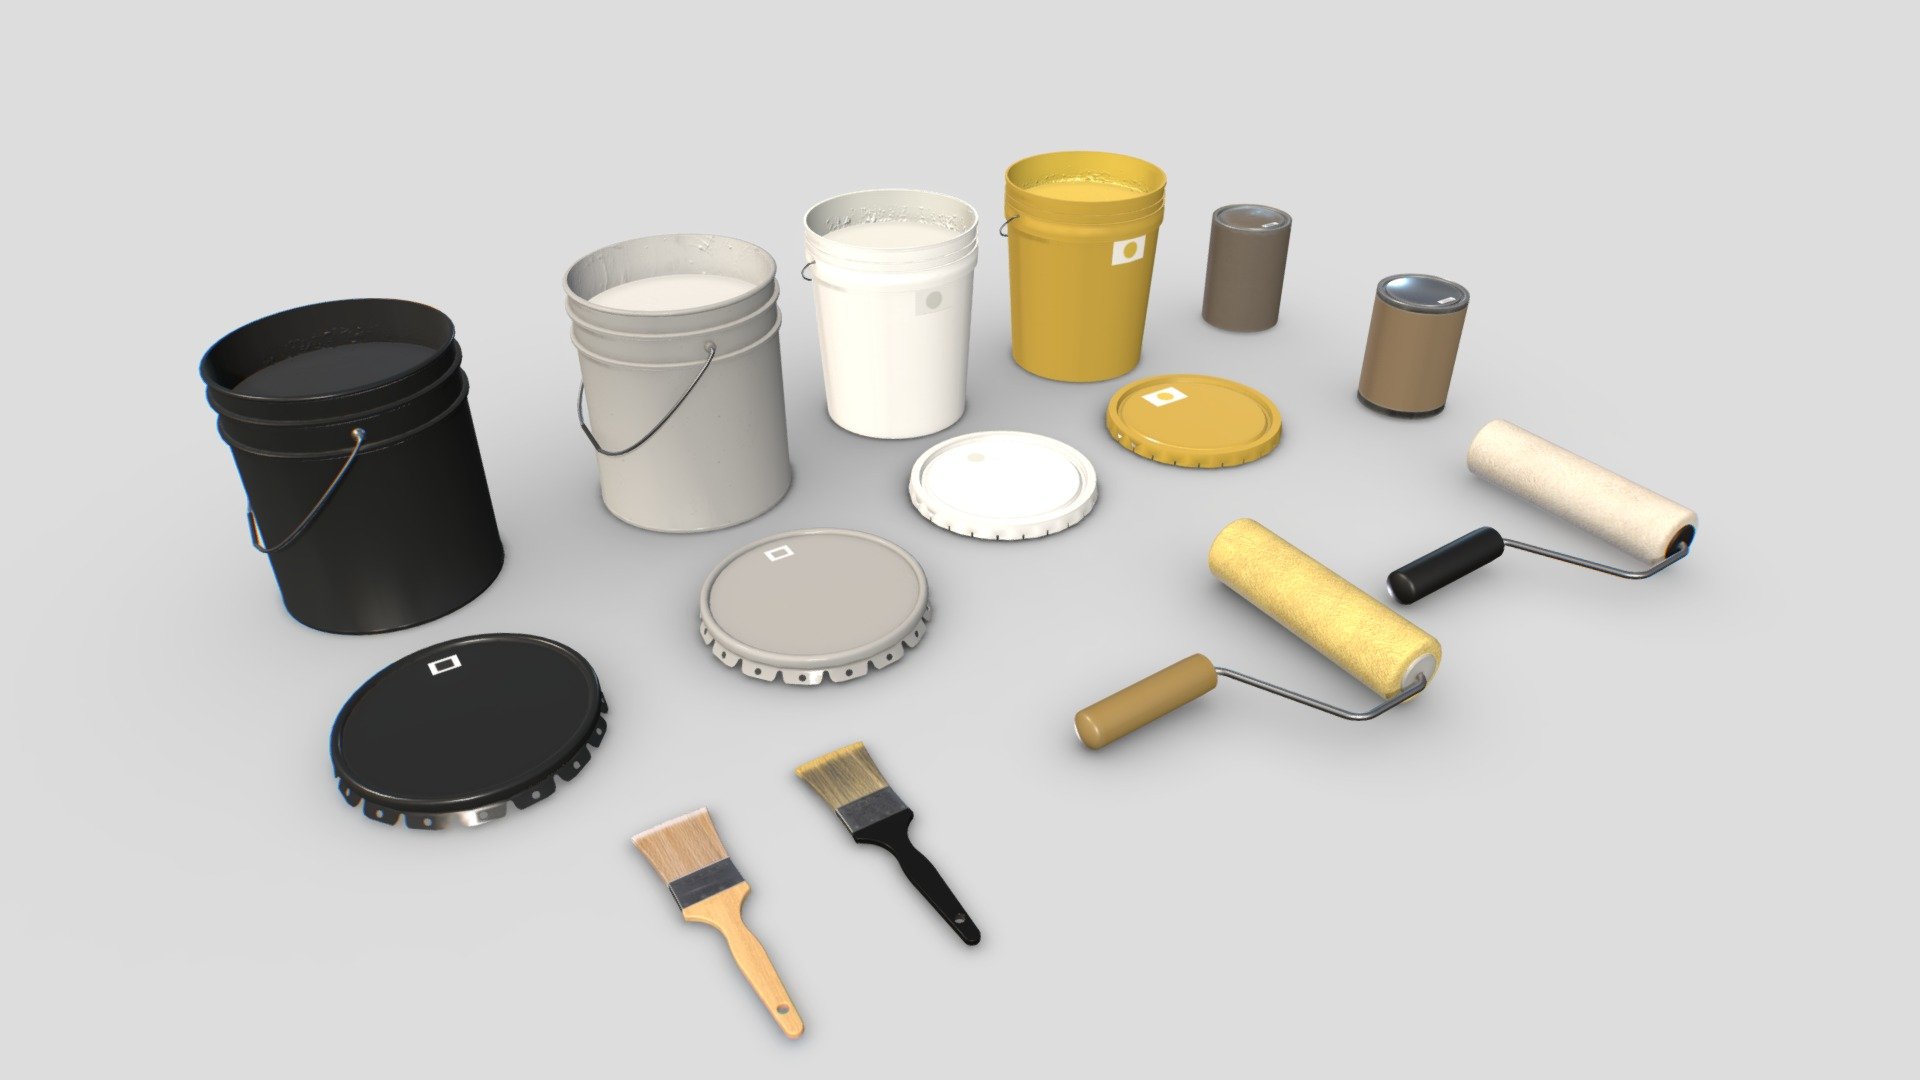 Pack of painting tools. Realistic scale. Includes 3 paint buckets, 1 brush and 1 paint roller.

Each objects comes with 2 texture sets, for a total of 14 different objects.

2 materials.

PBR 4096x PBR textures including Albedo, Normal, Metalness, Roughness and AO. Unreal ARM mask texture included (ao, rough, metal). Also unity HDRP mask included.

15k verts and 30k tris in total 3d model